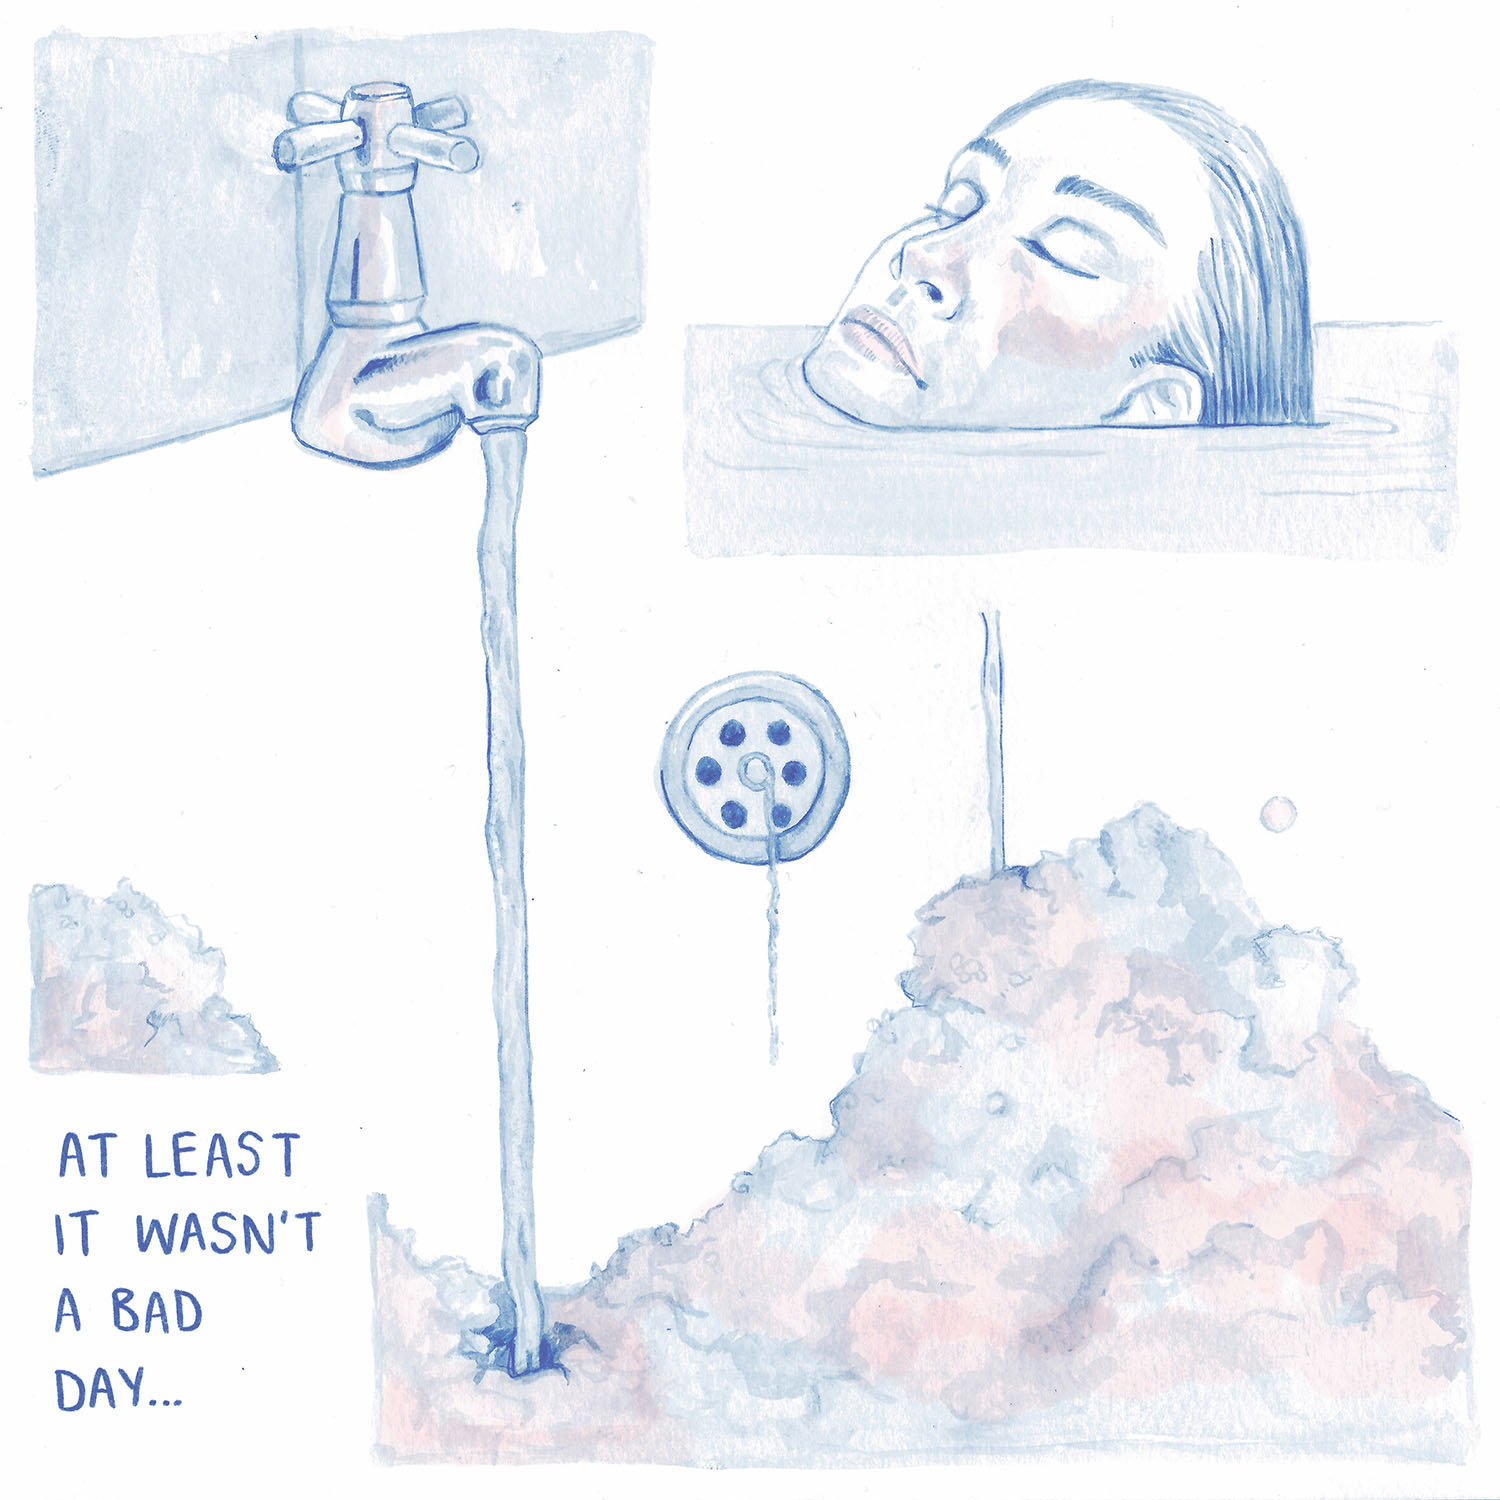 Short format comic about accepting 'at least it wasn't a bad day'